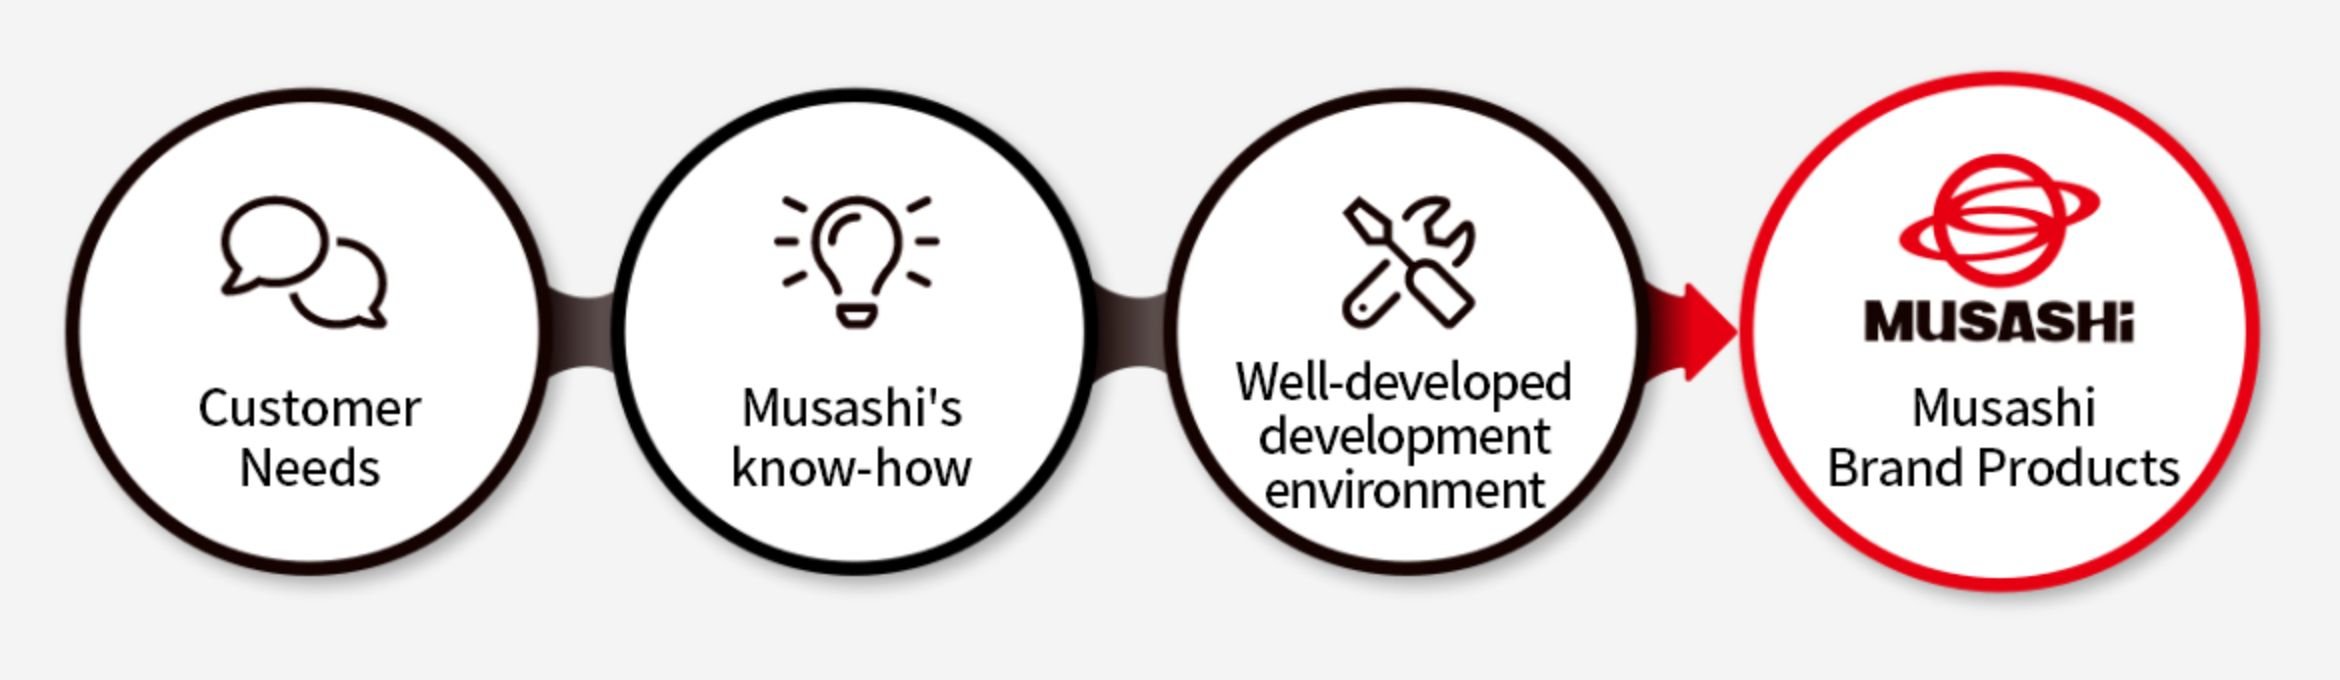 Customer Needs・Musashi's know-how・Well-developed development environment・Musashi Brand Products